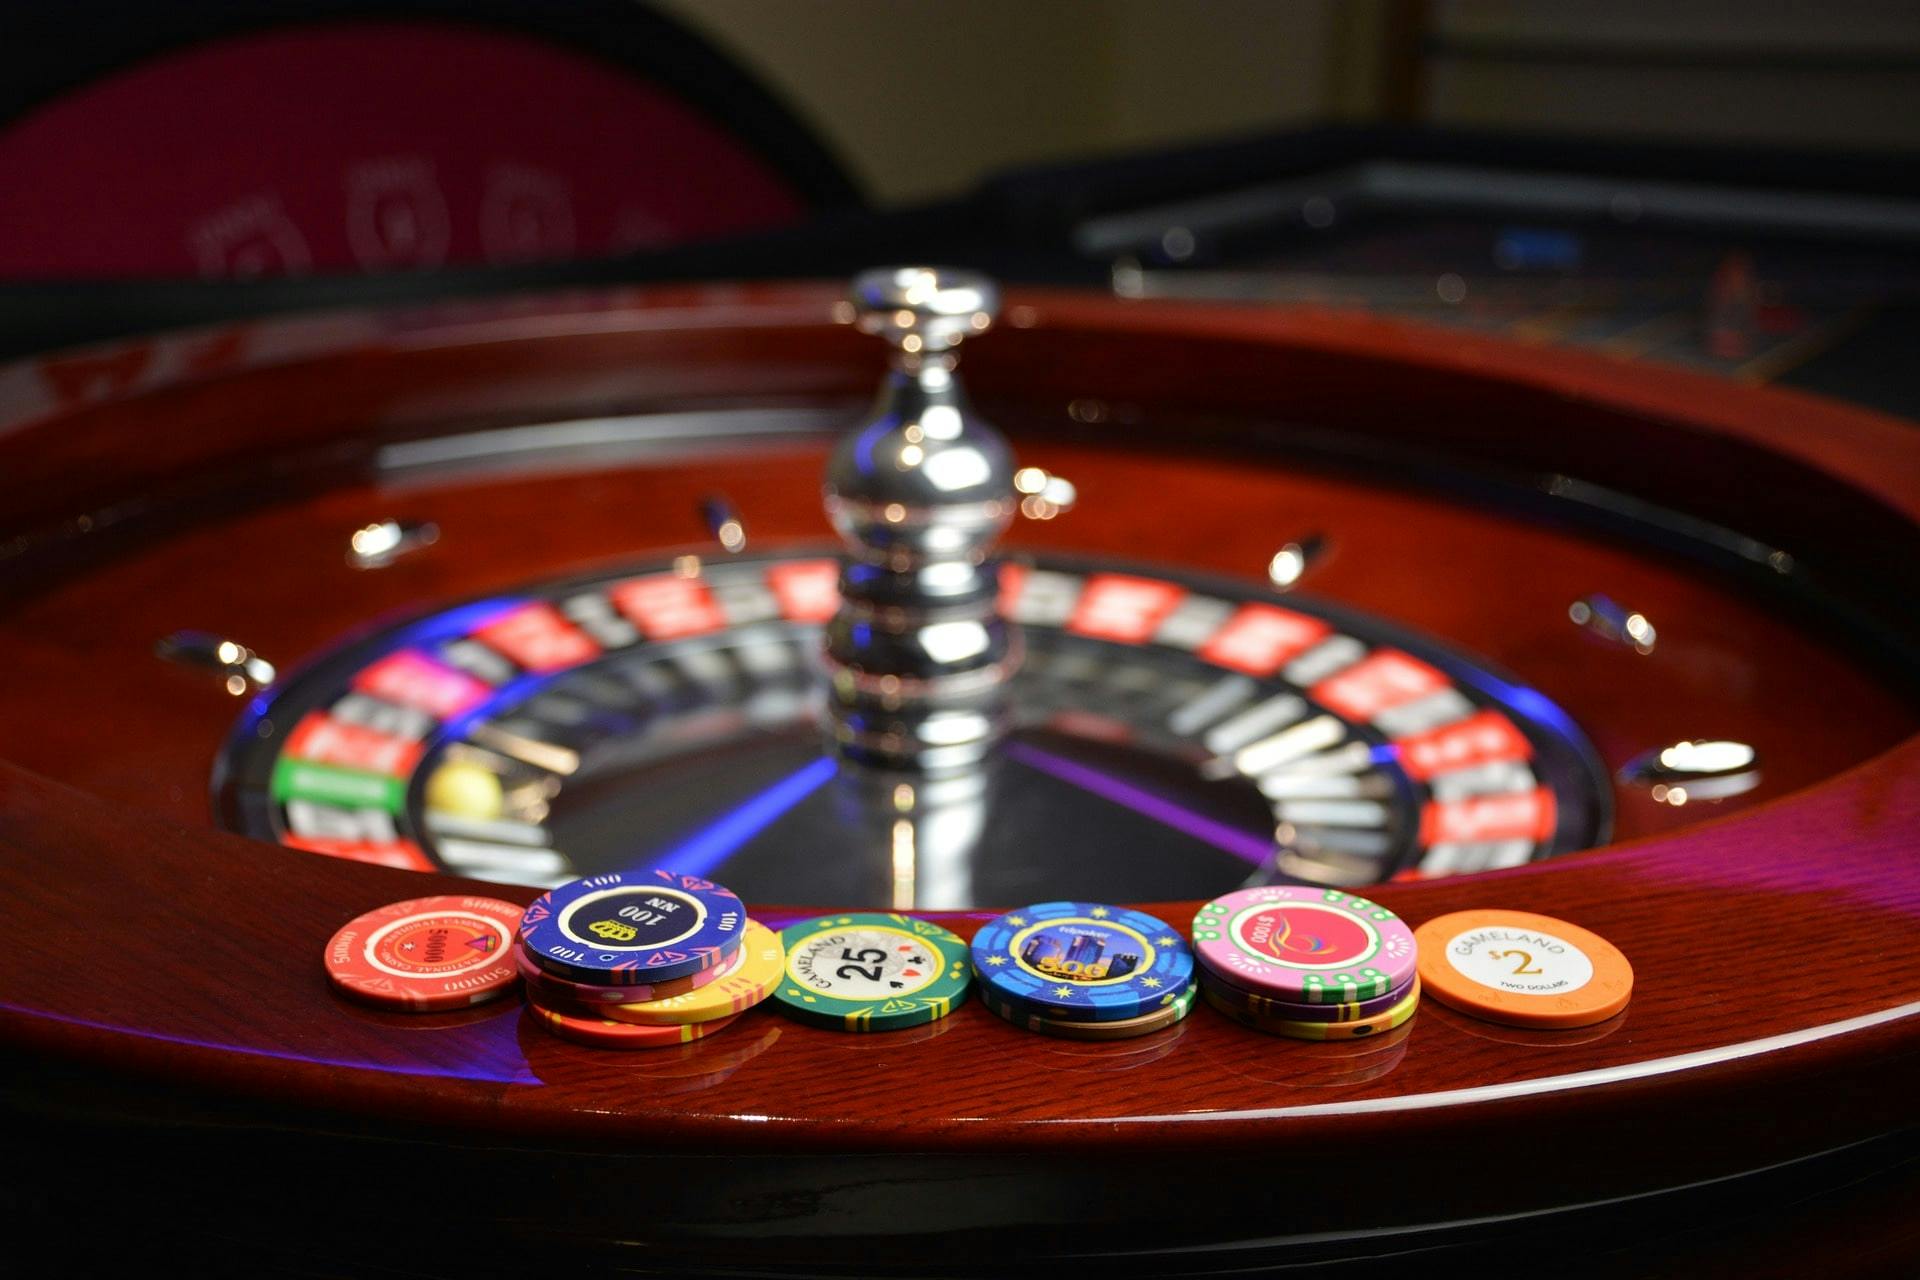 Types of roulette bets